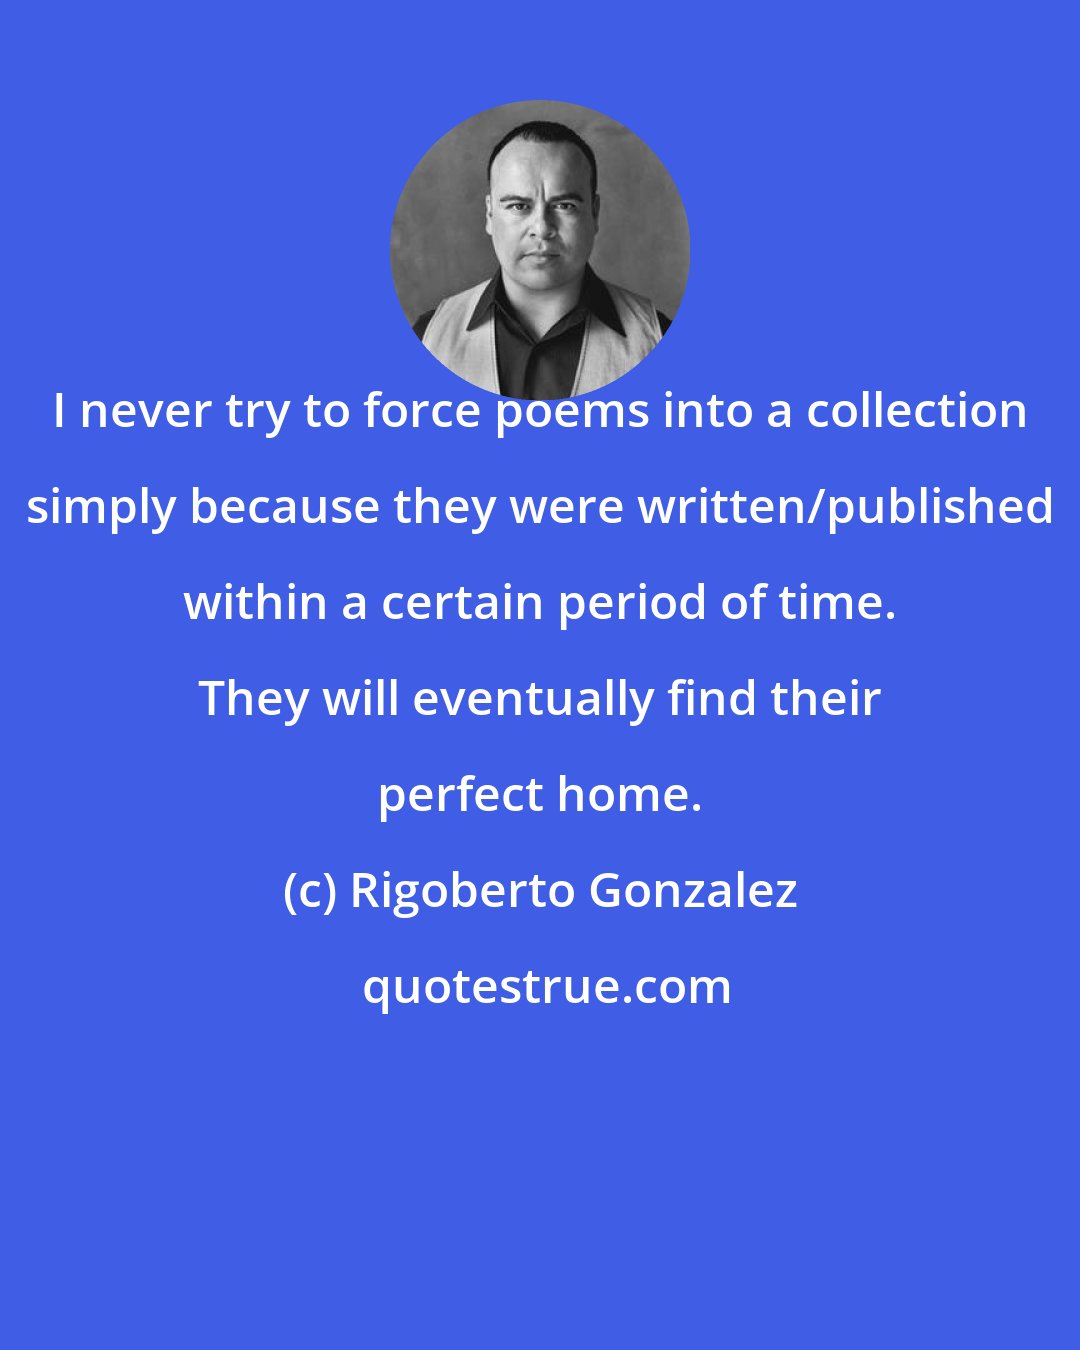 Rigoberto Gonzalez: I never try to force poems into a collection simply because they were written/published within a certain period of time. They will eventually find their perfect home.